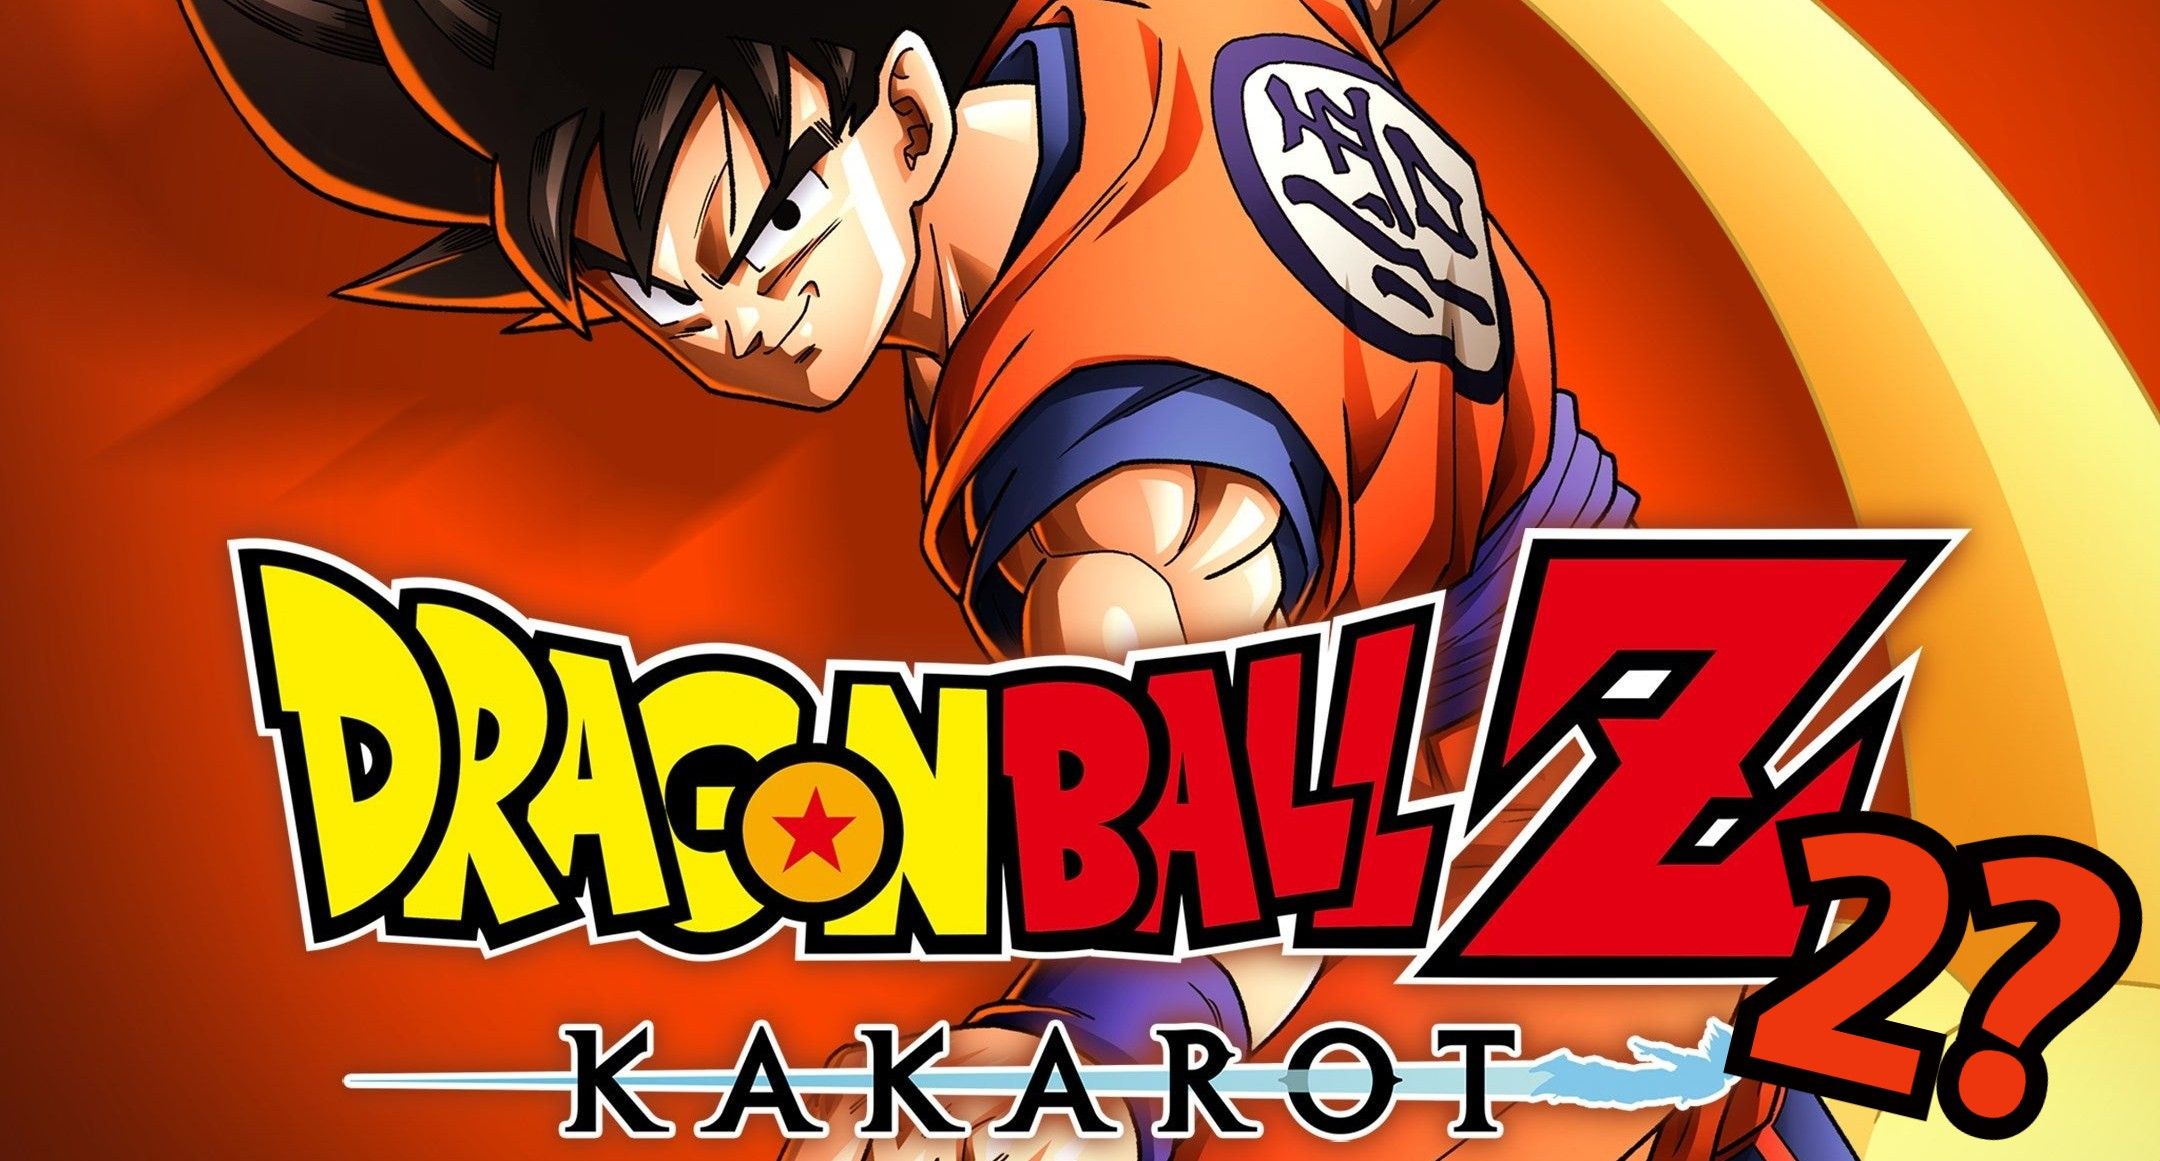 Upcoming 'DBZ: Kakarot' DLC Will Take Players on the Ultimate